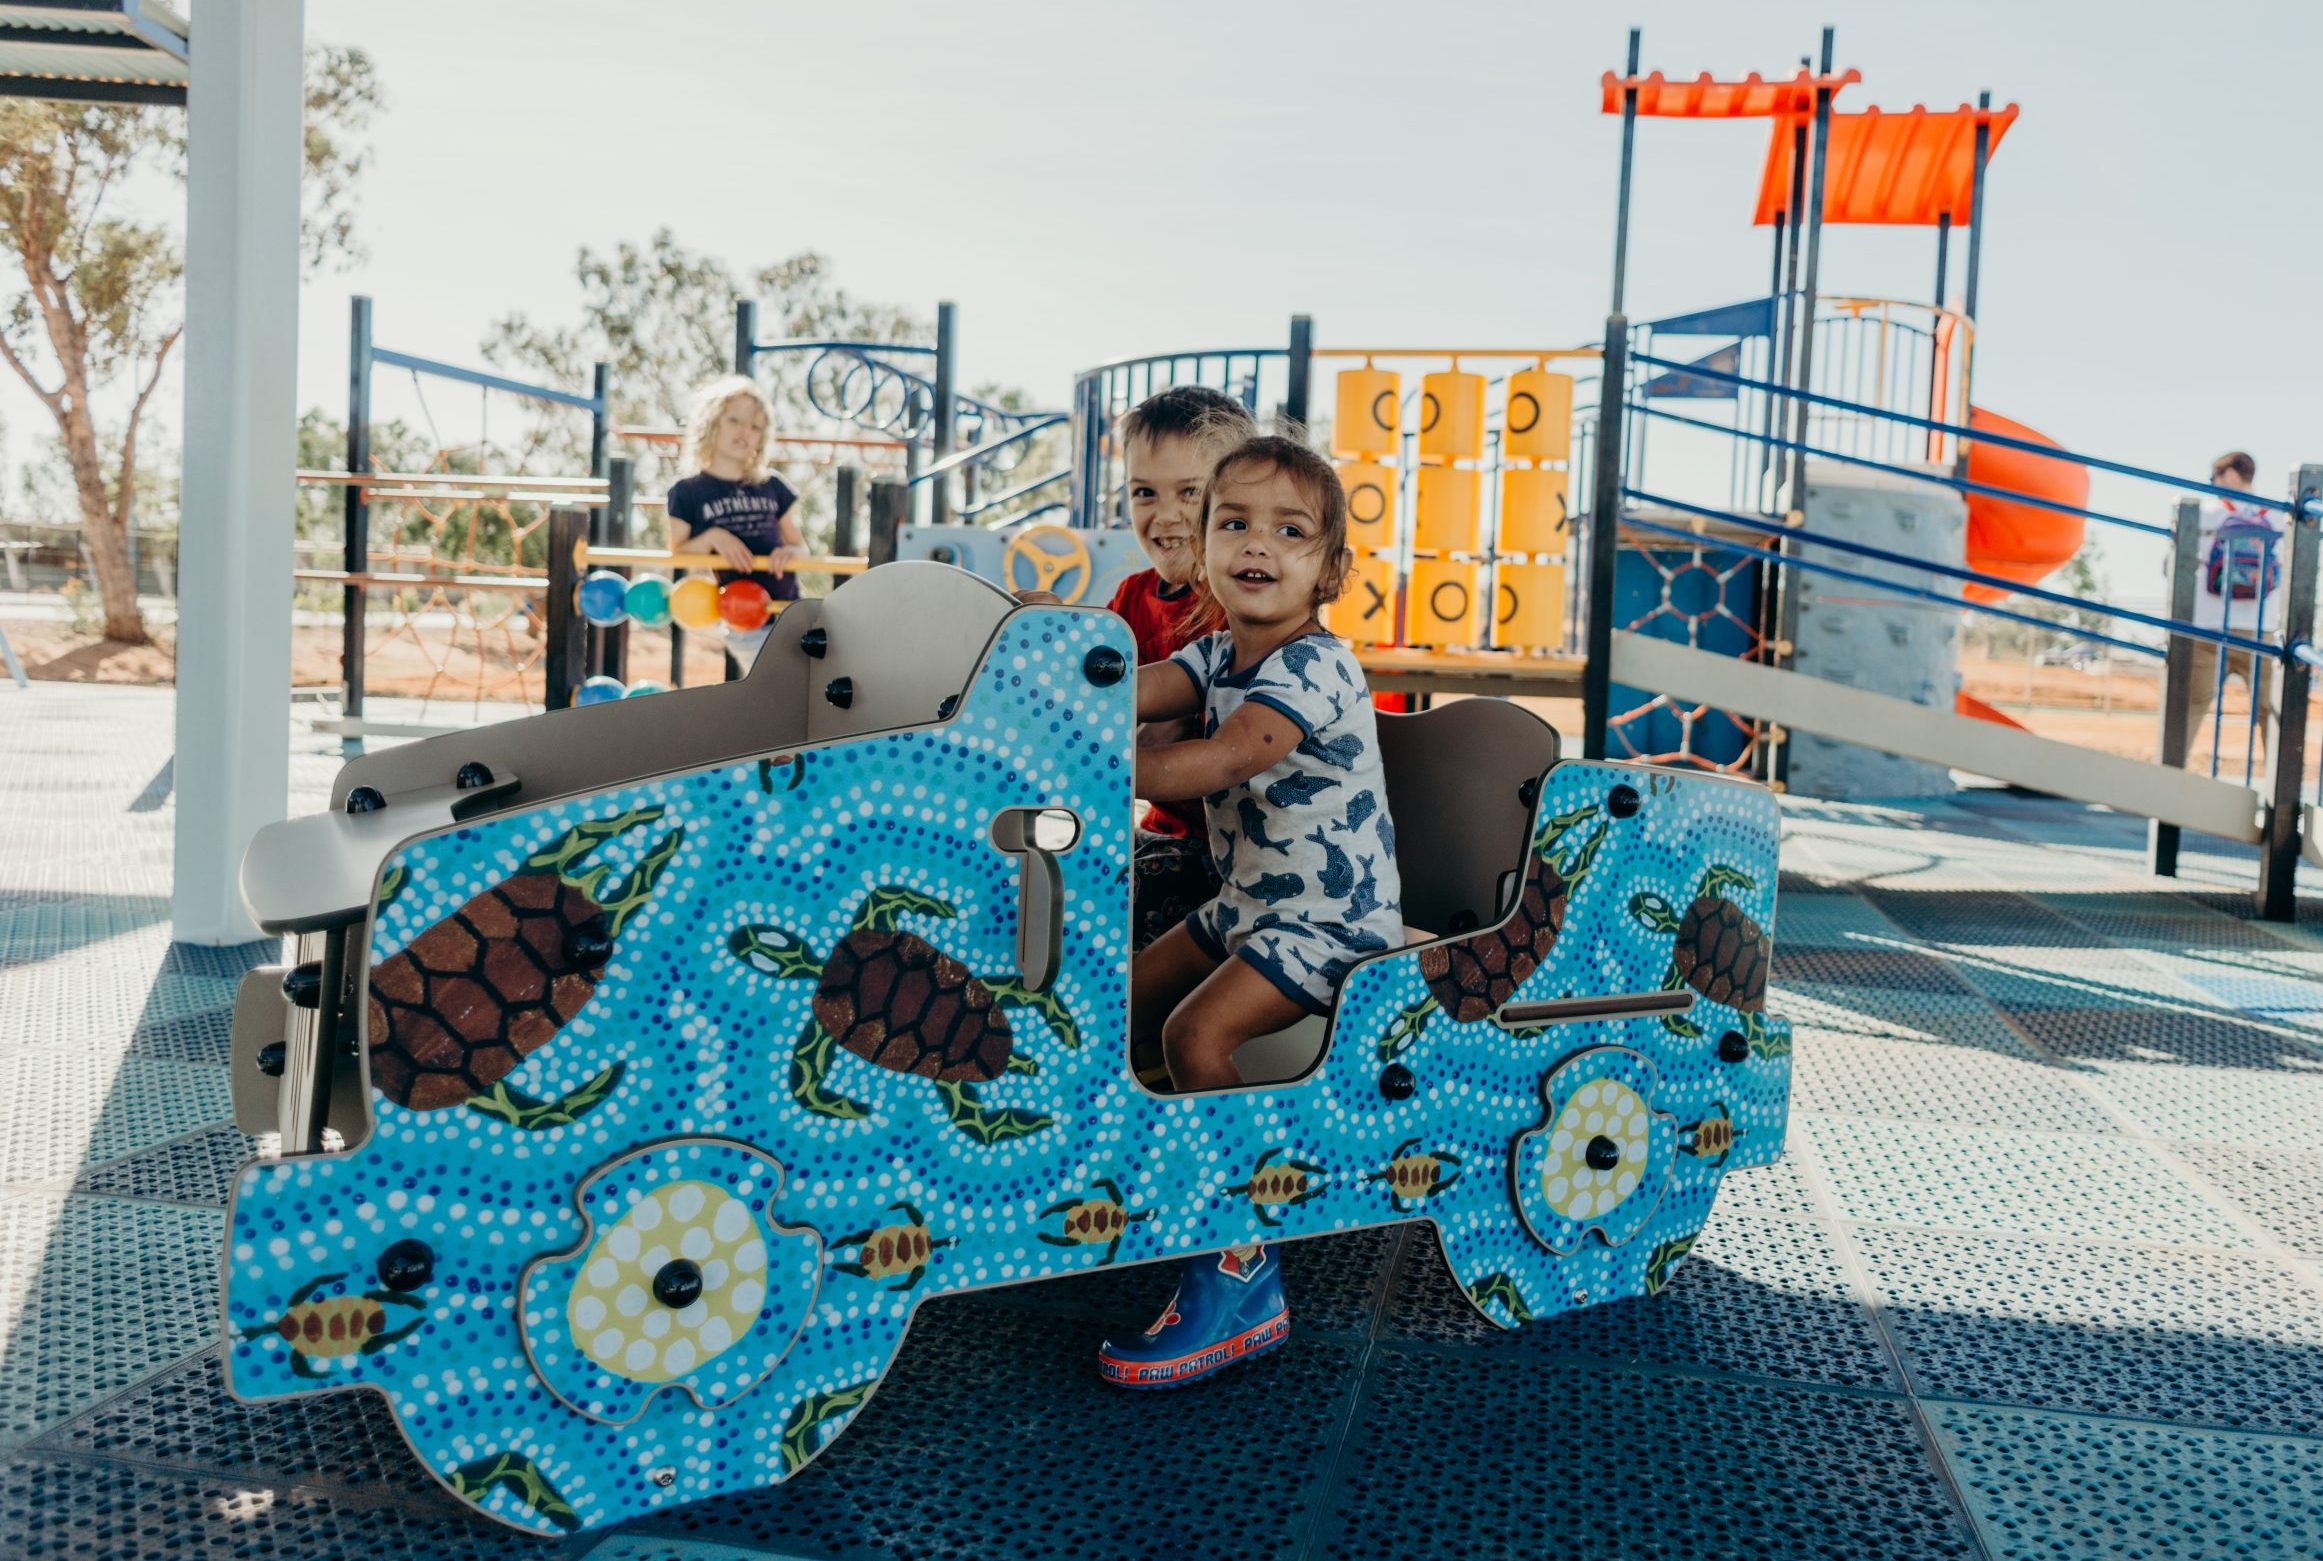 Child Care in Hedland – understanding the issues